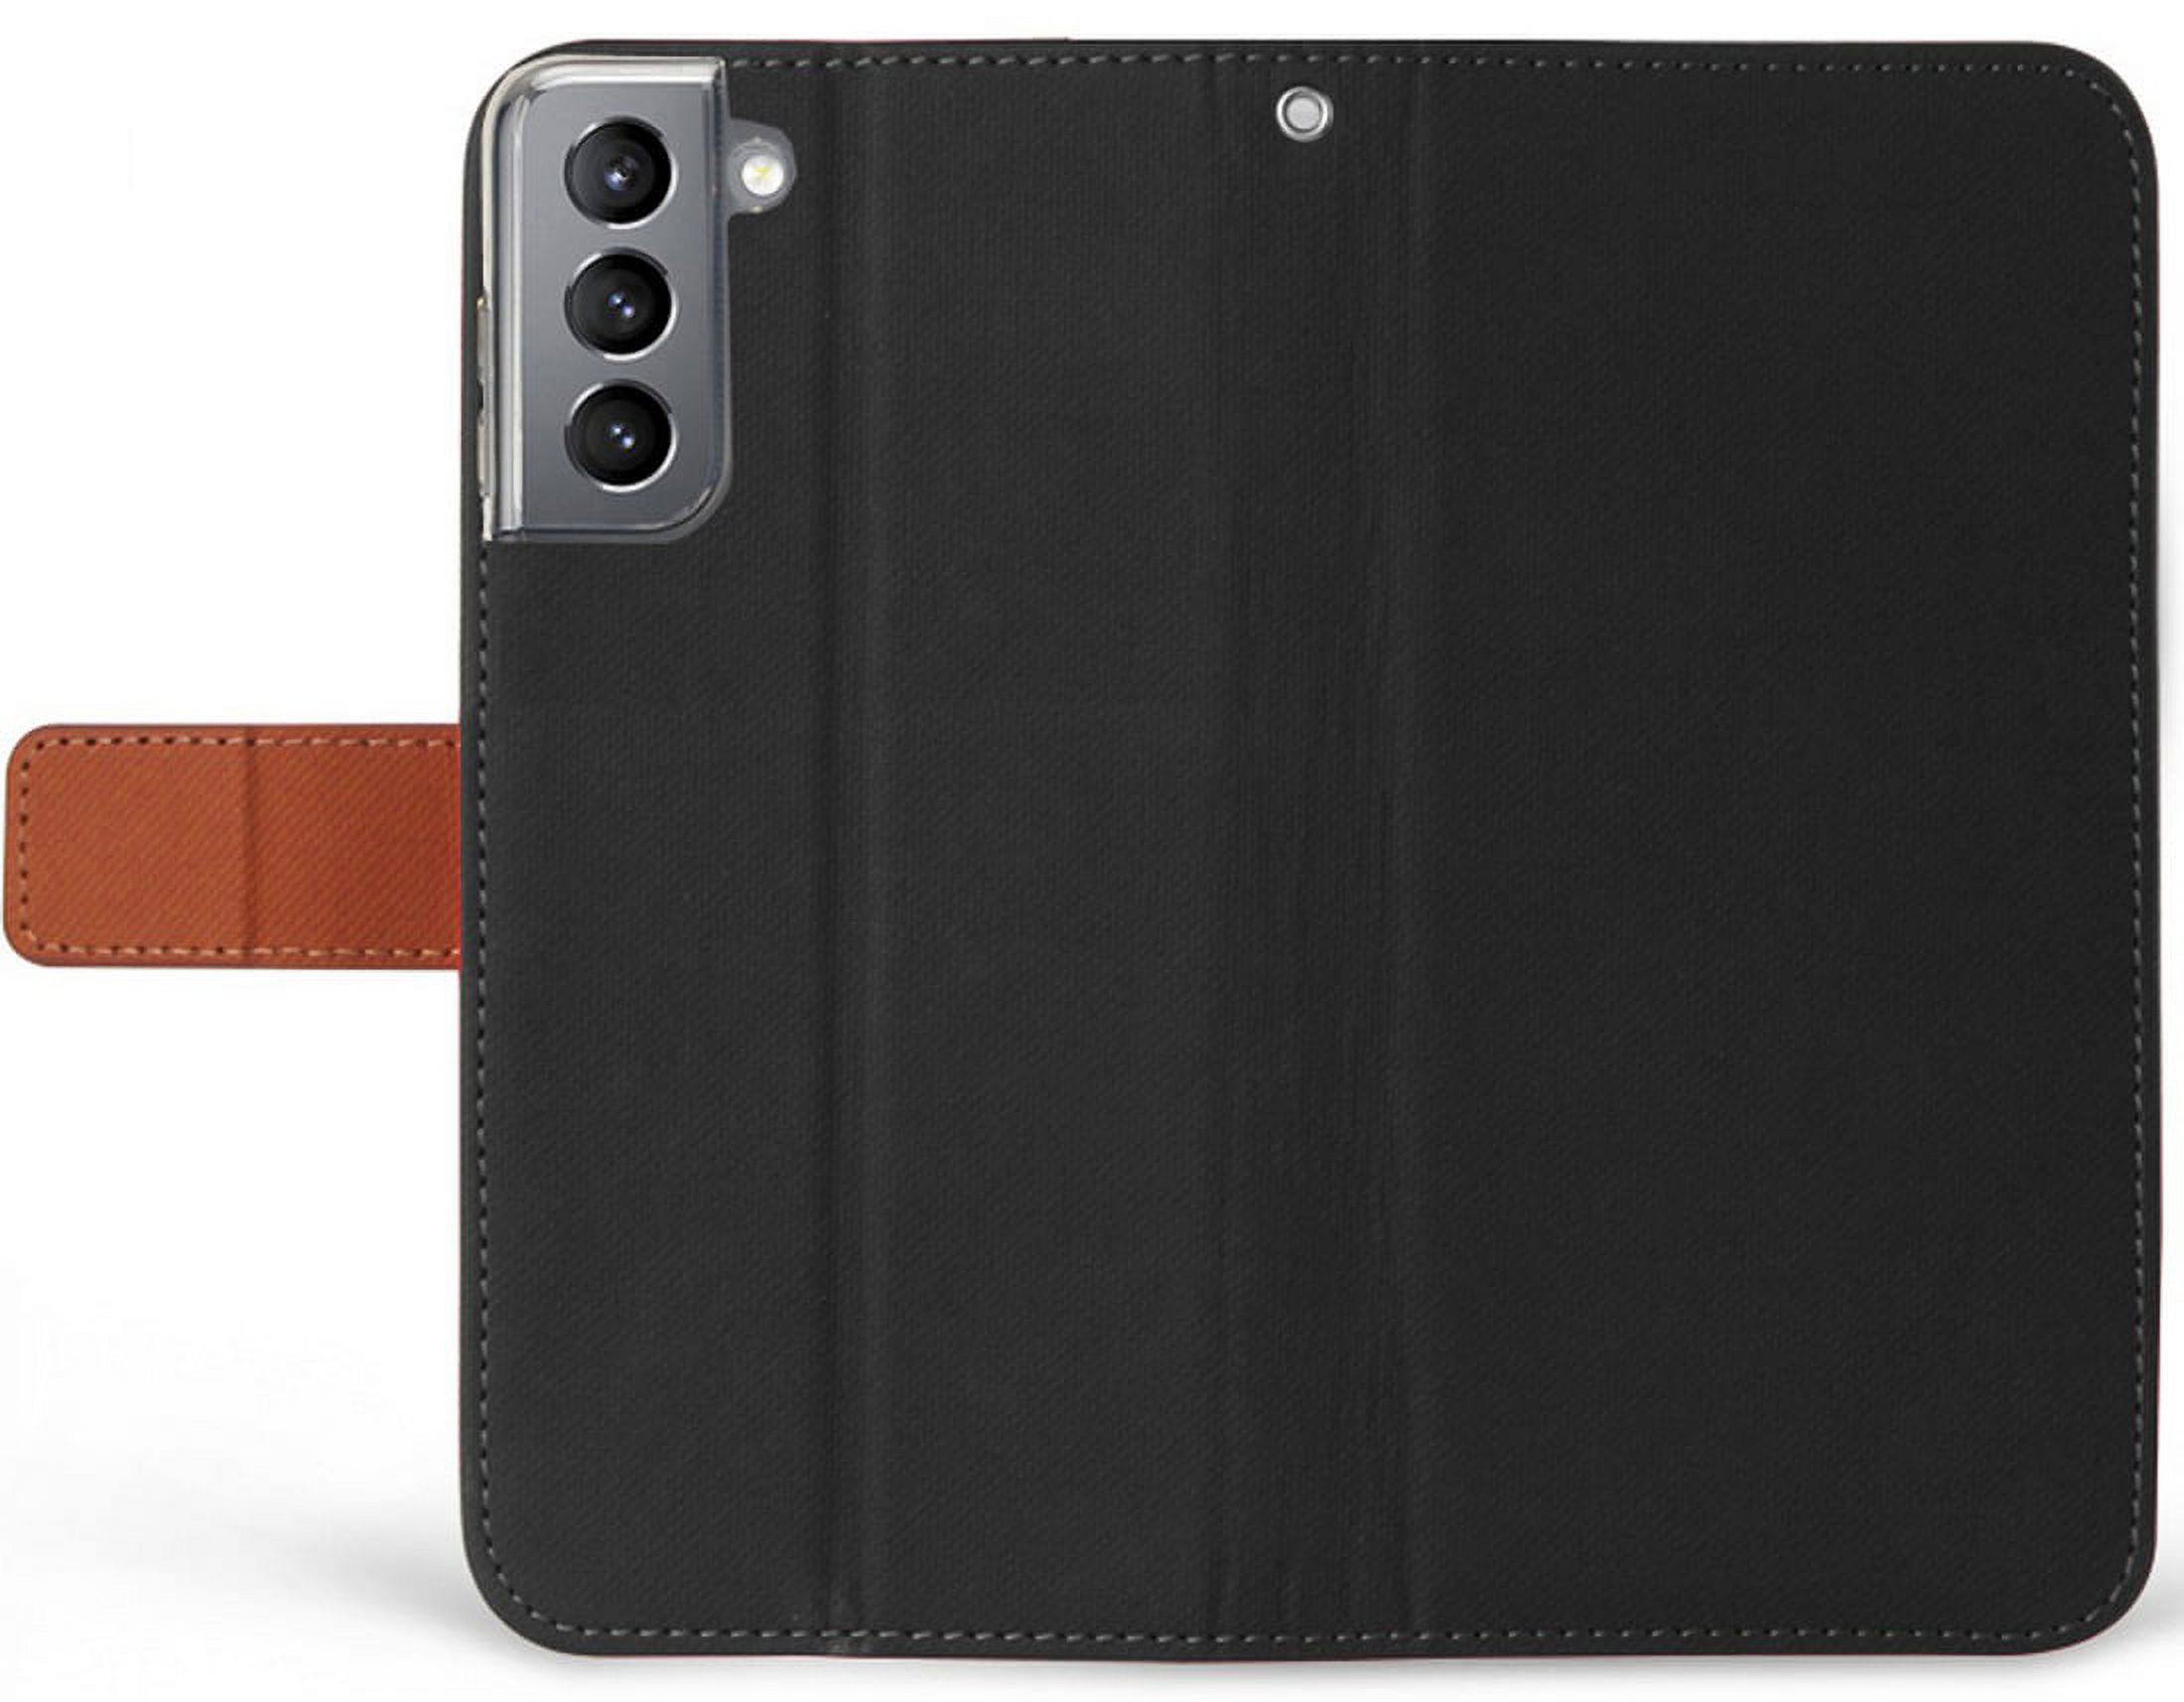 Wallet Phone Case for Galaxy S21 5G, [Black/Brown] Folio Credit Card Slot ID Cover, View Stand [with Magnetic Closure, Wrist Strap Lanyard] for Samsung Galaxy S21 5G (SM-G991) - image 5 of 8